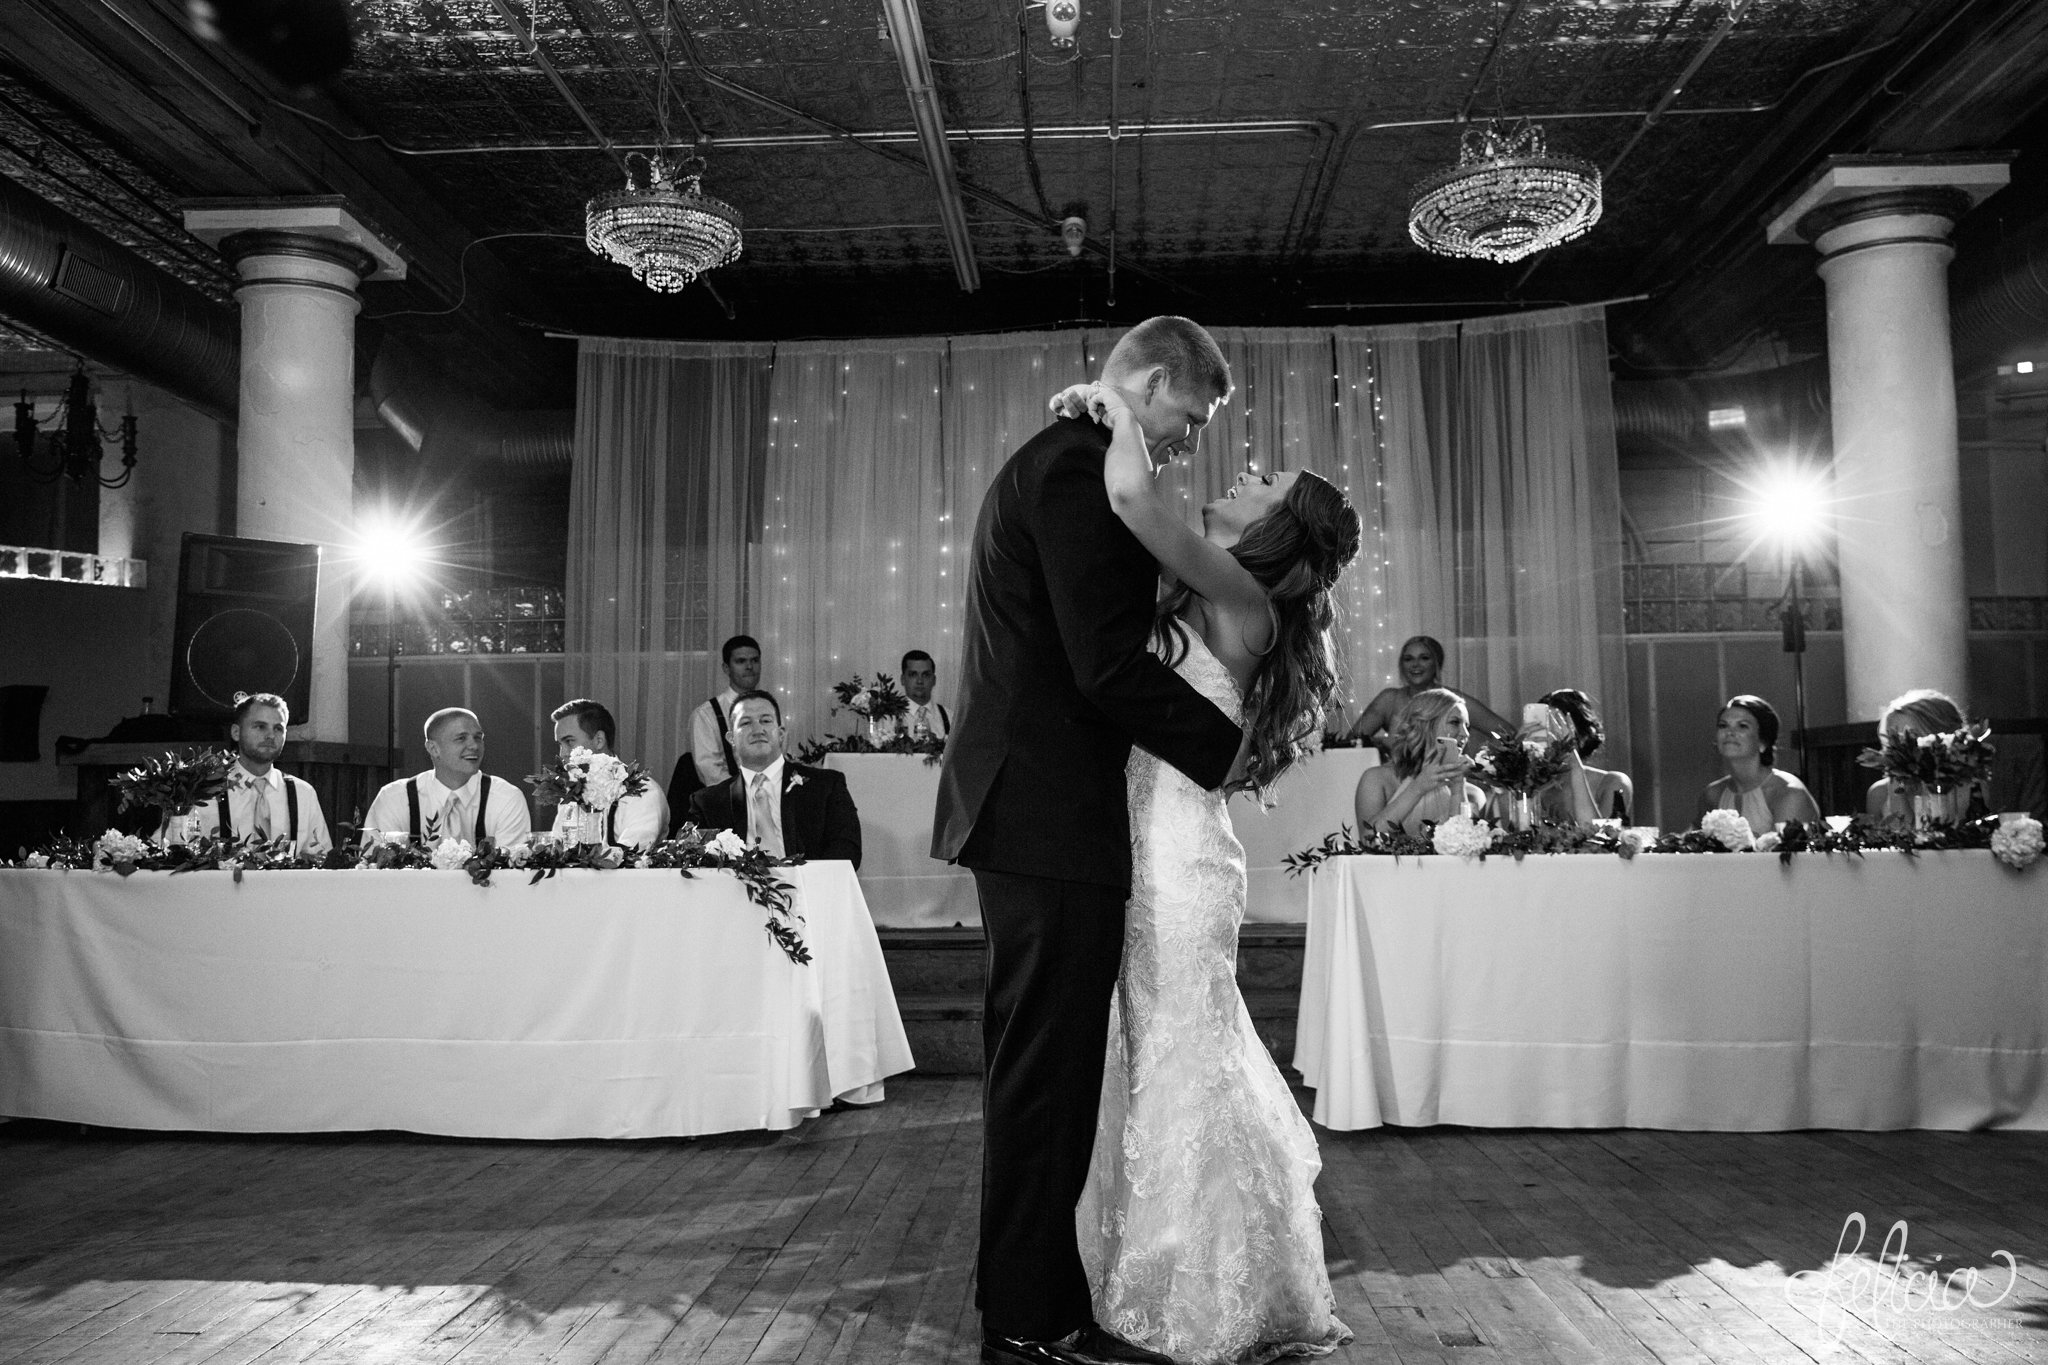 black and white | wedding | wedding photos | Rumely Event Space | wedding photography | images by feliciathephotographer.com | historic venue | wedding reception | first dance | candid | high ceilings | chandeliers | tile ceilings 